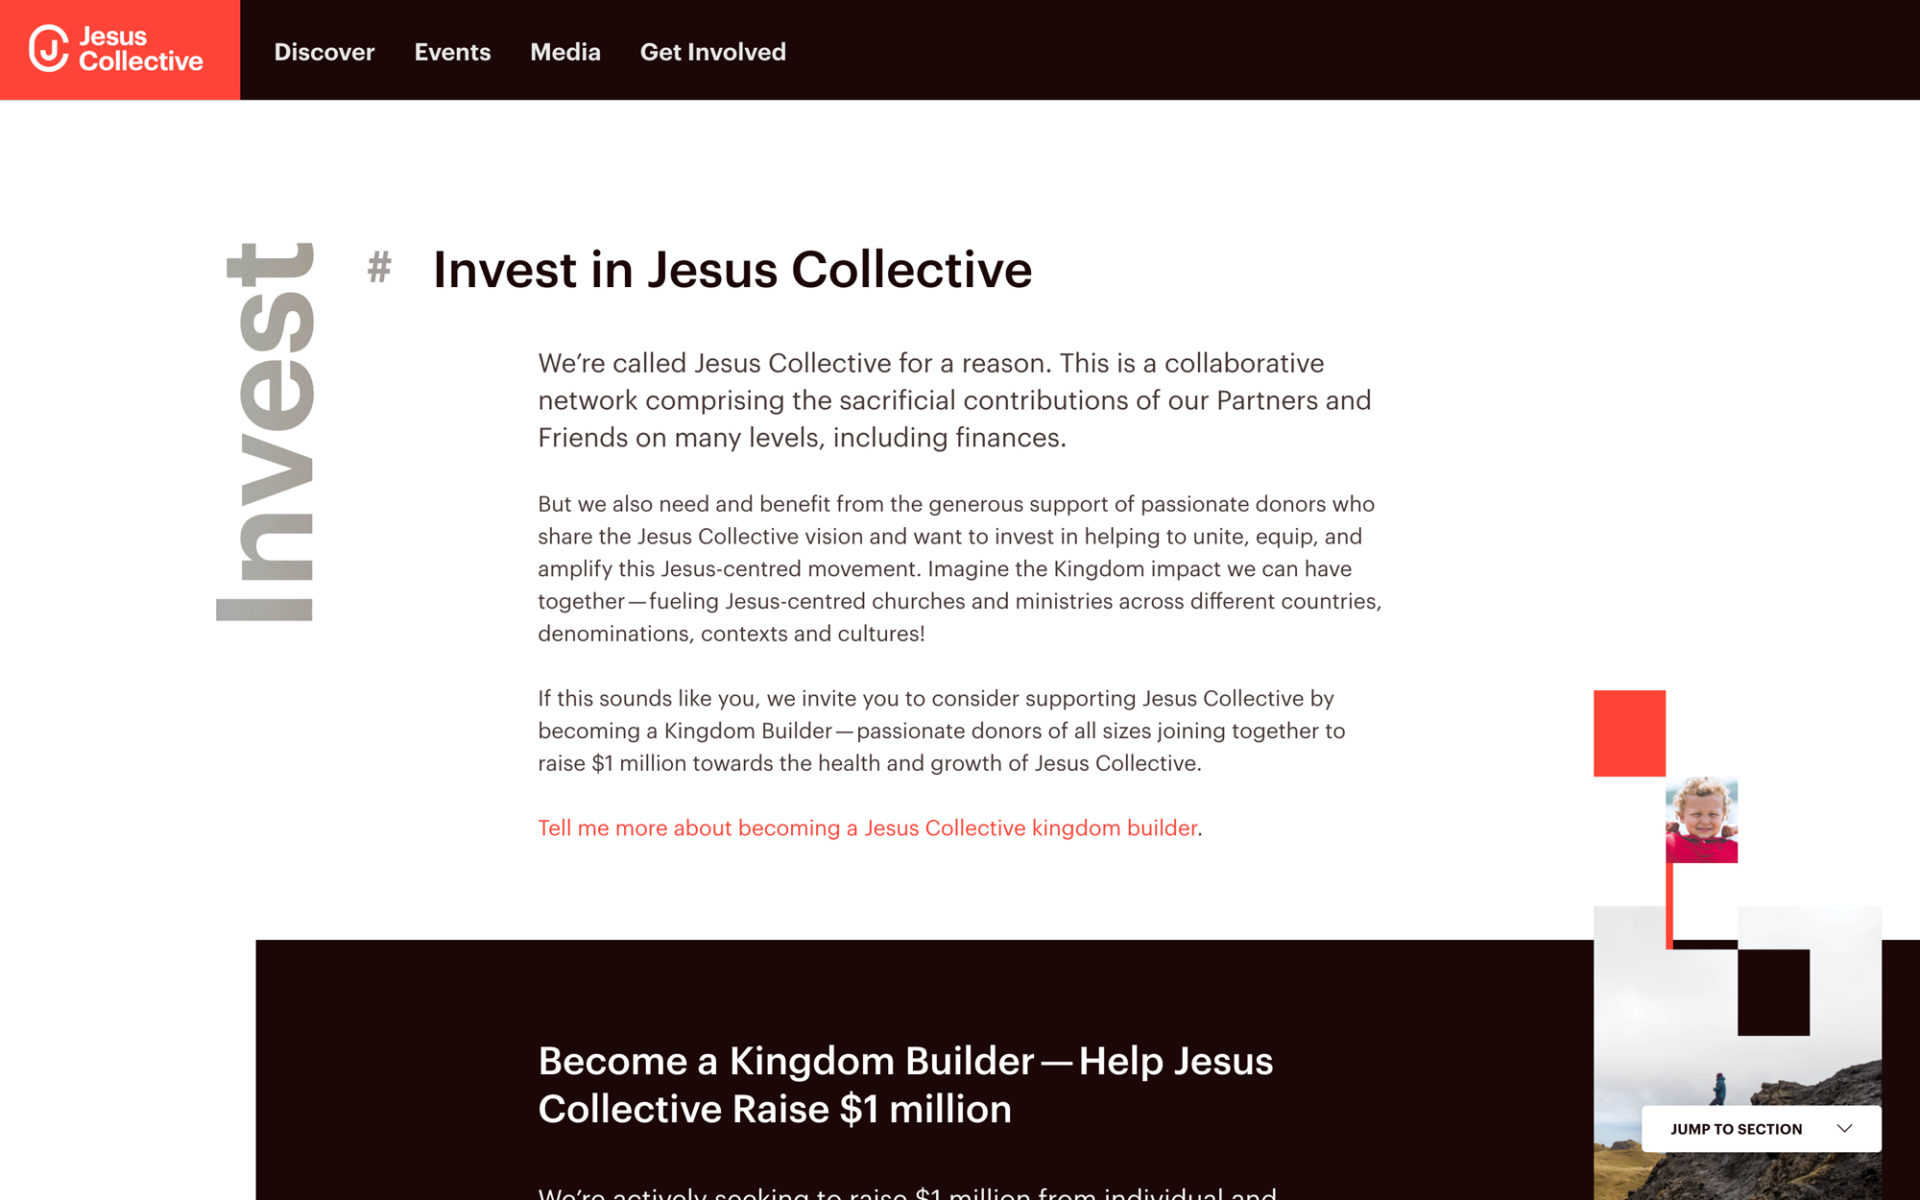 A page about investing in Jesus Collective